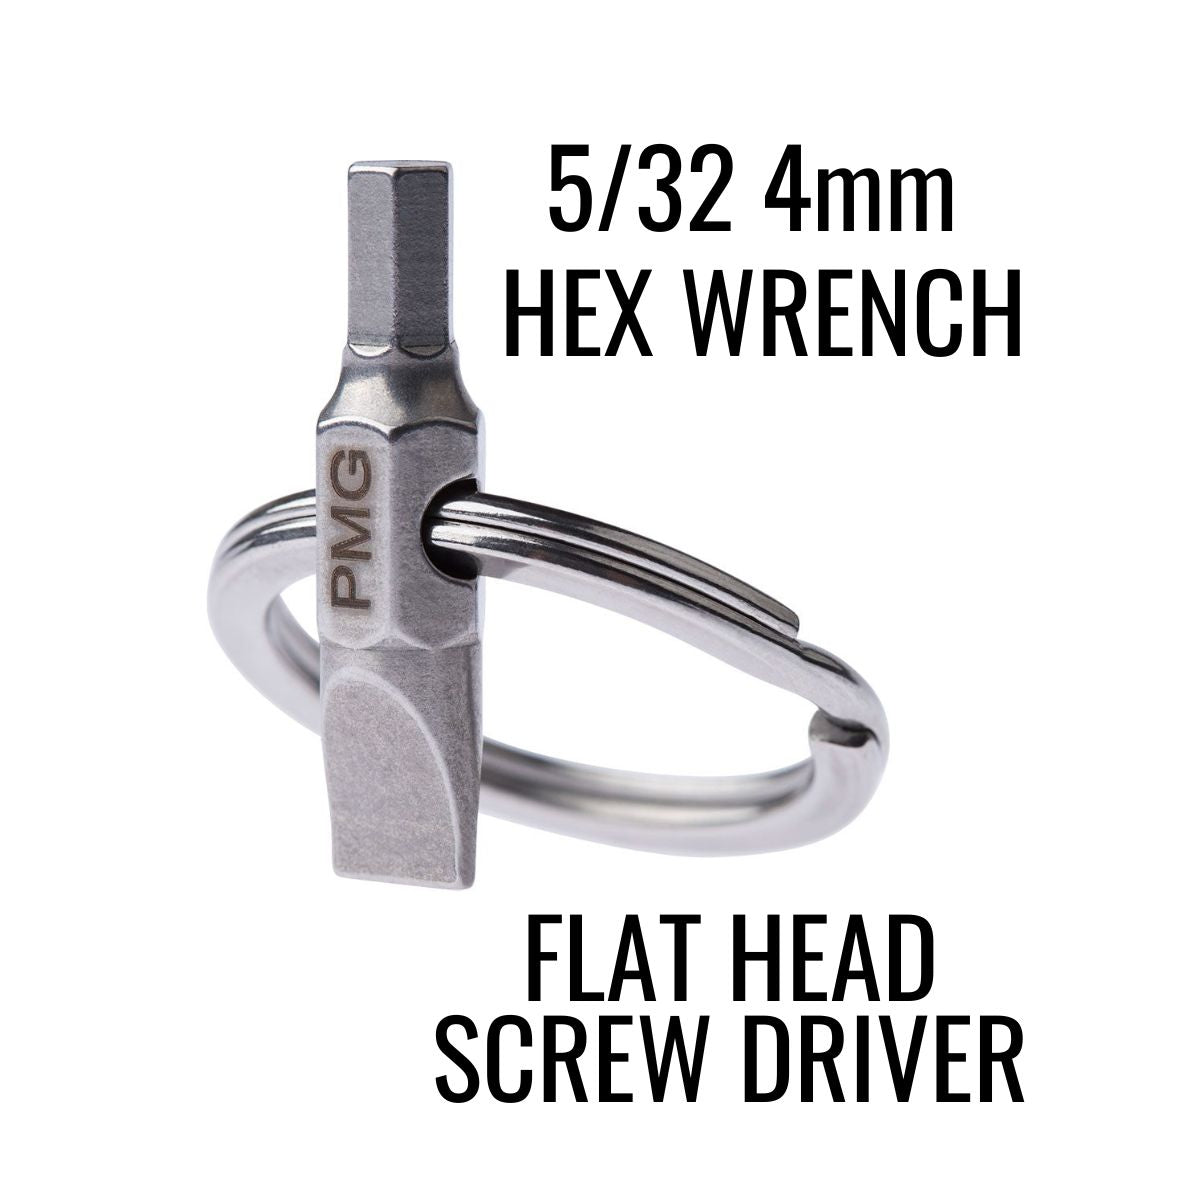 5/32 4mm hex wrench and flat head screw driver